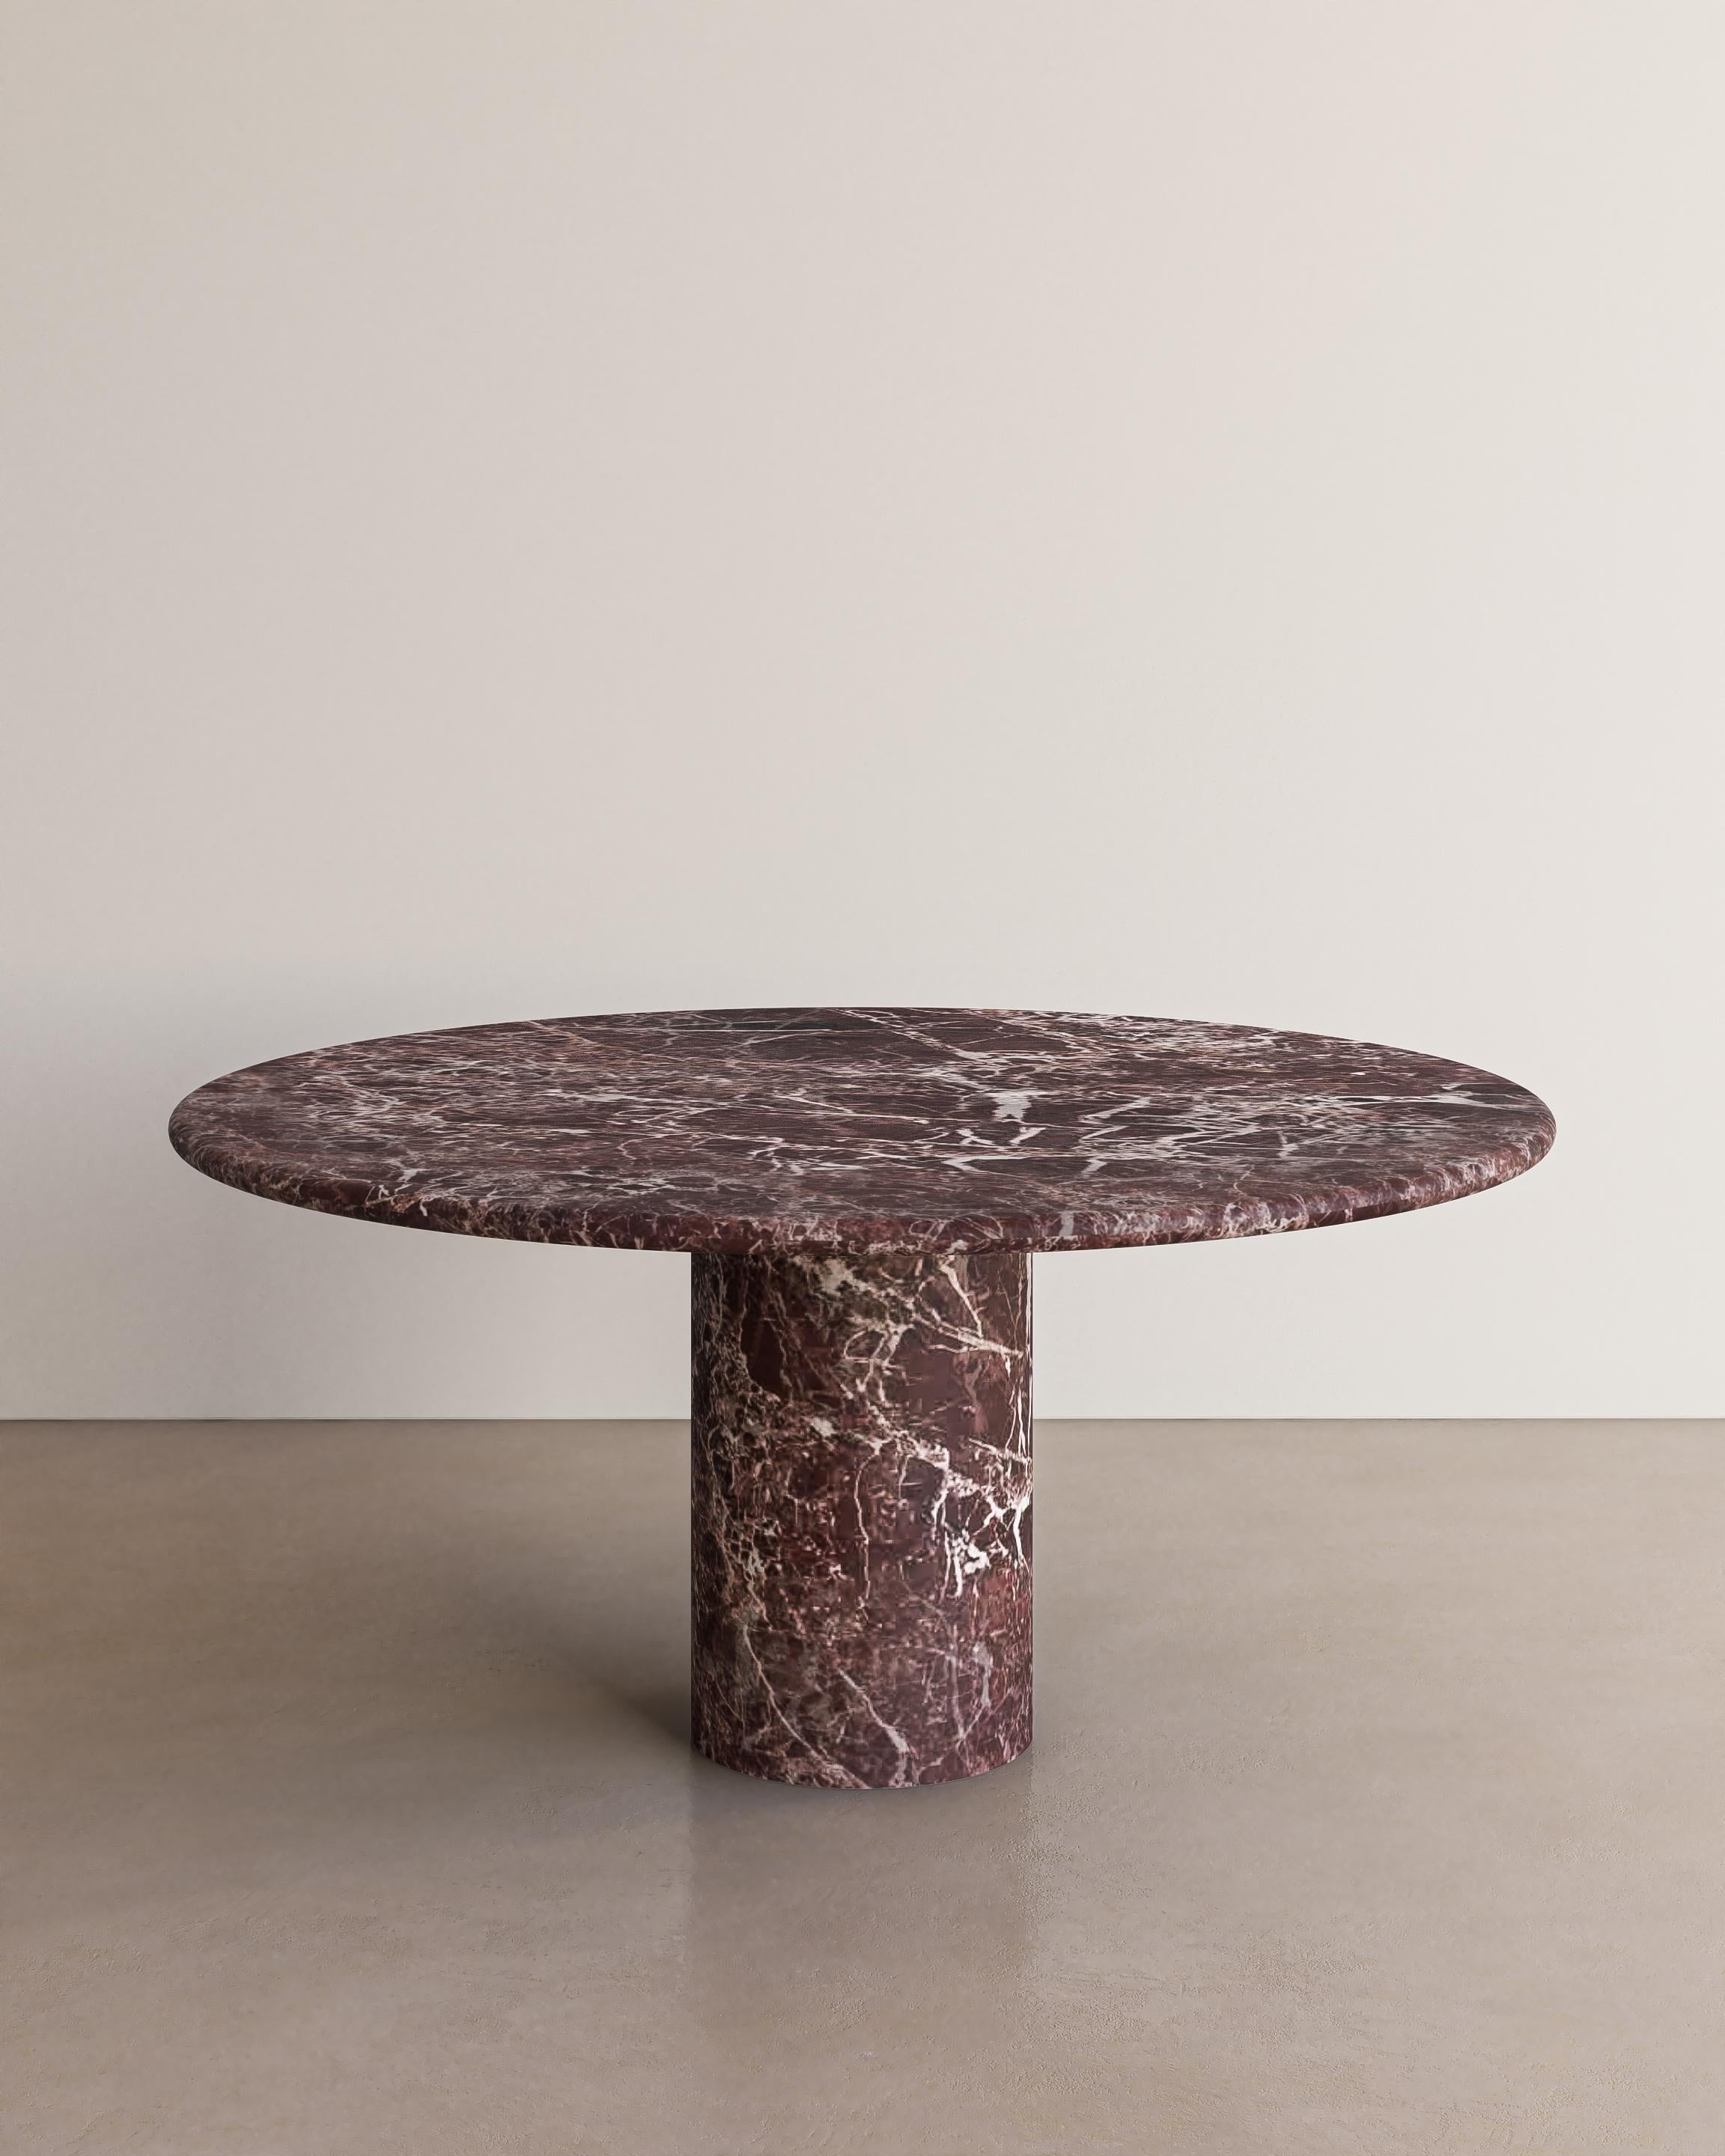 La Mer Quartzite Voyage Dining Table i by the Essentialist For Sale 4